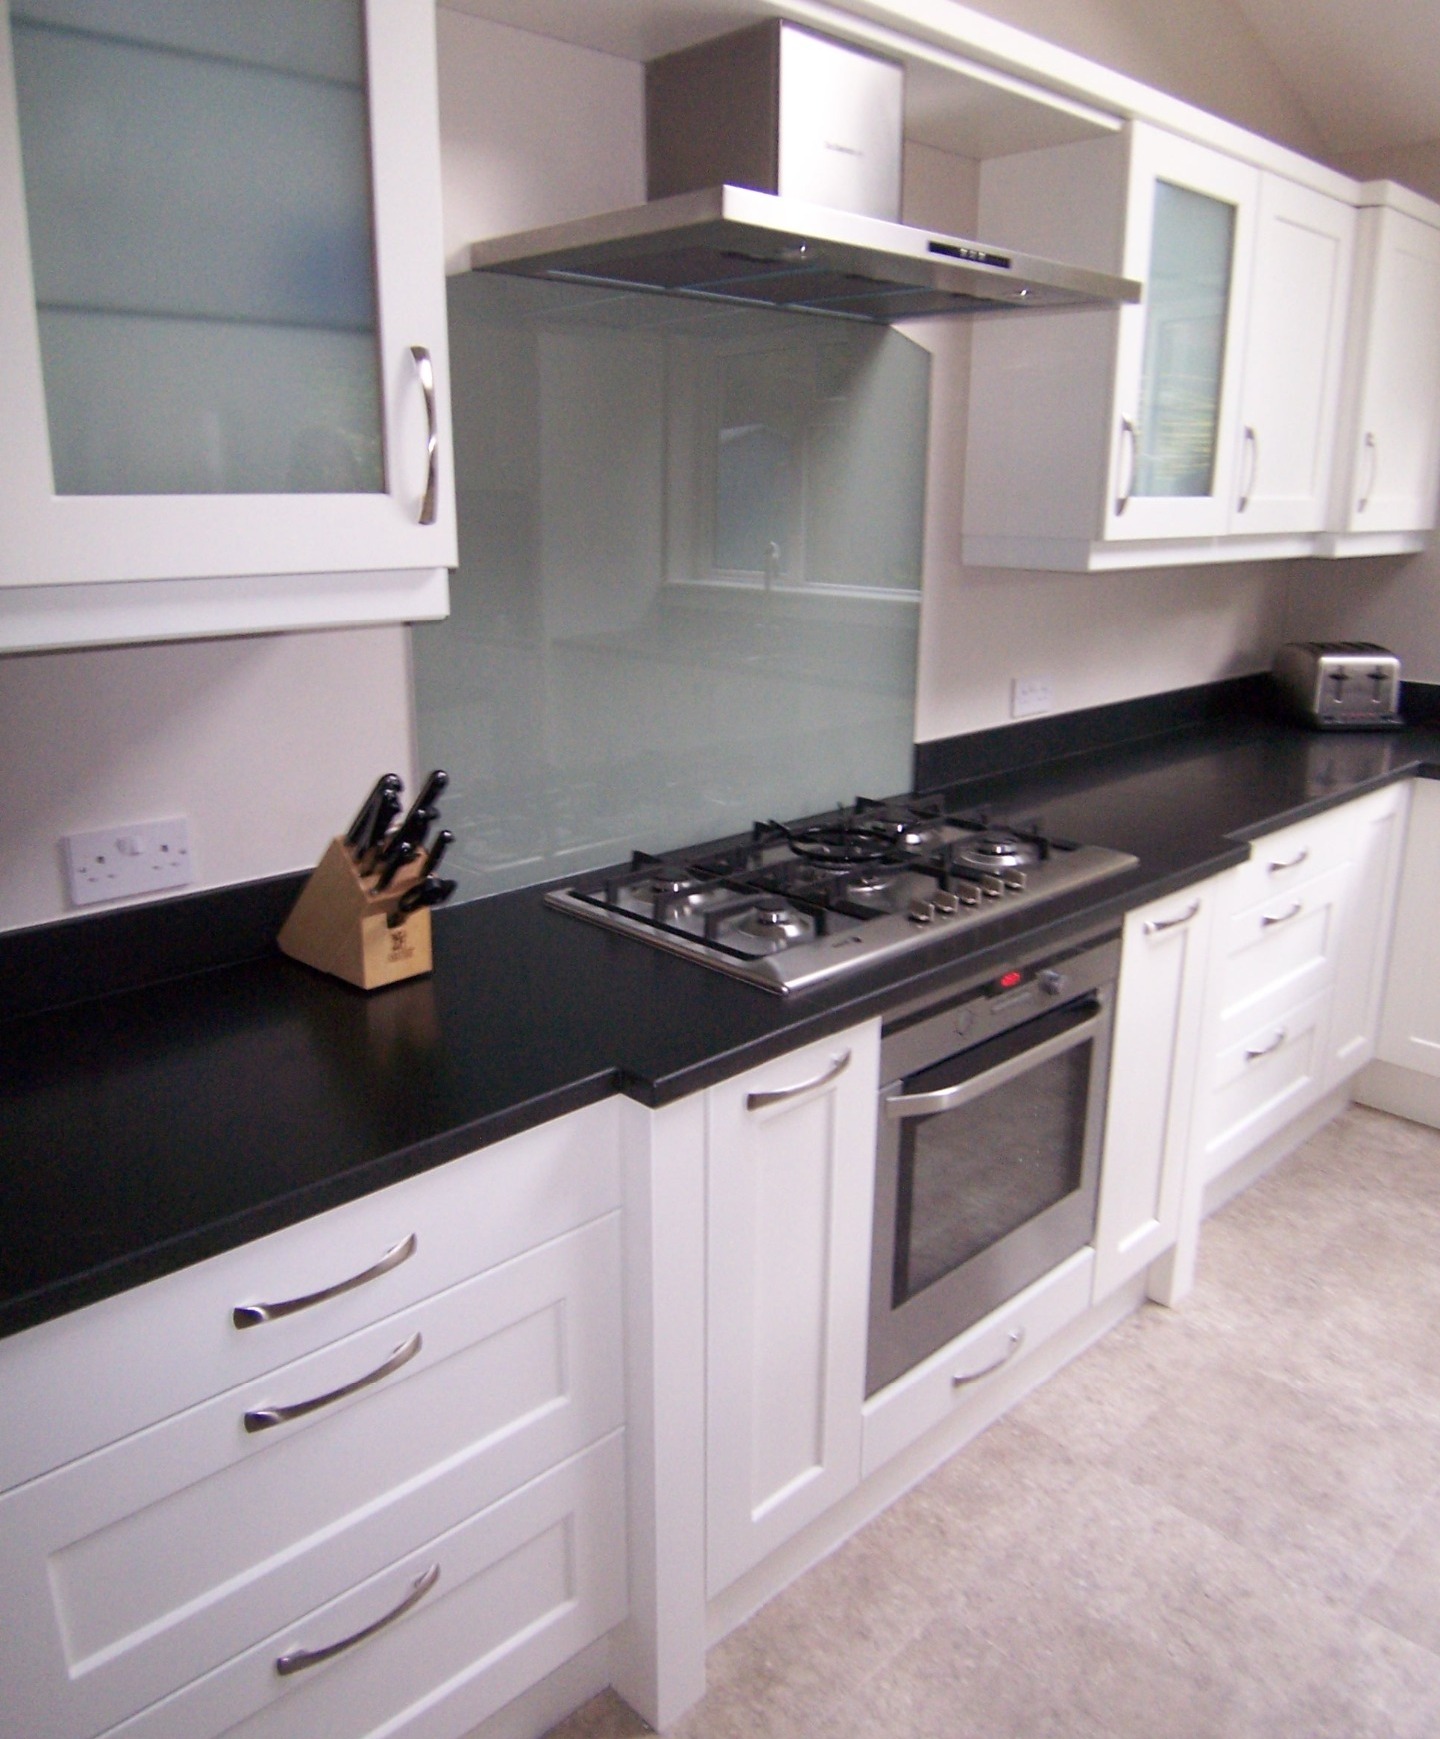 Stainless steel extractor and glass splashback